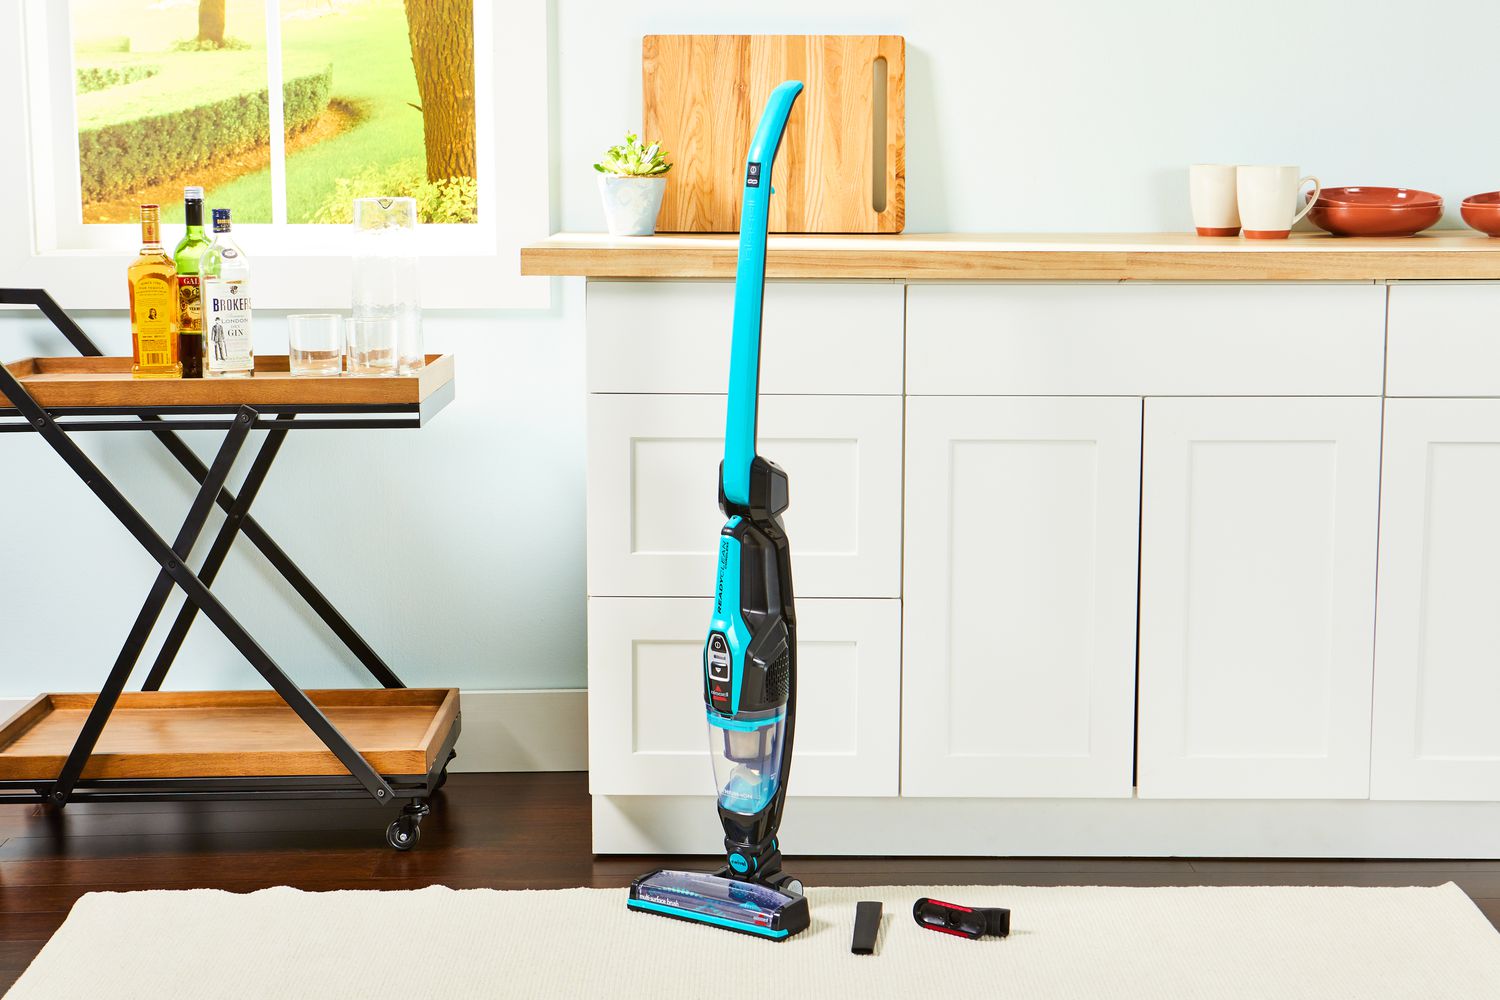 The BISSELL 3061 Featherweight Cordless Stick Vacuum staged in a kitchen on a rug.